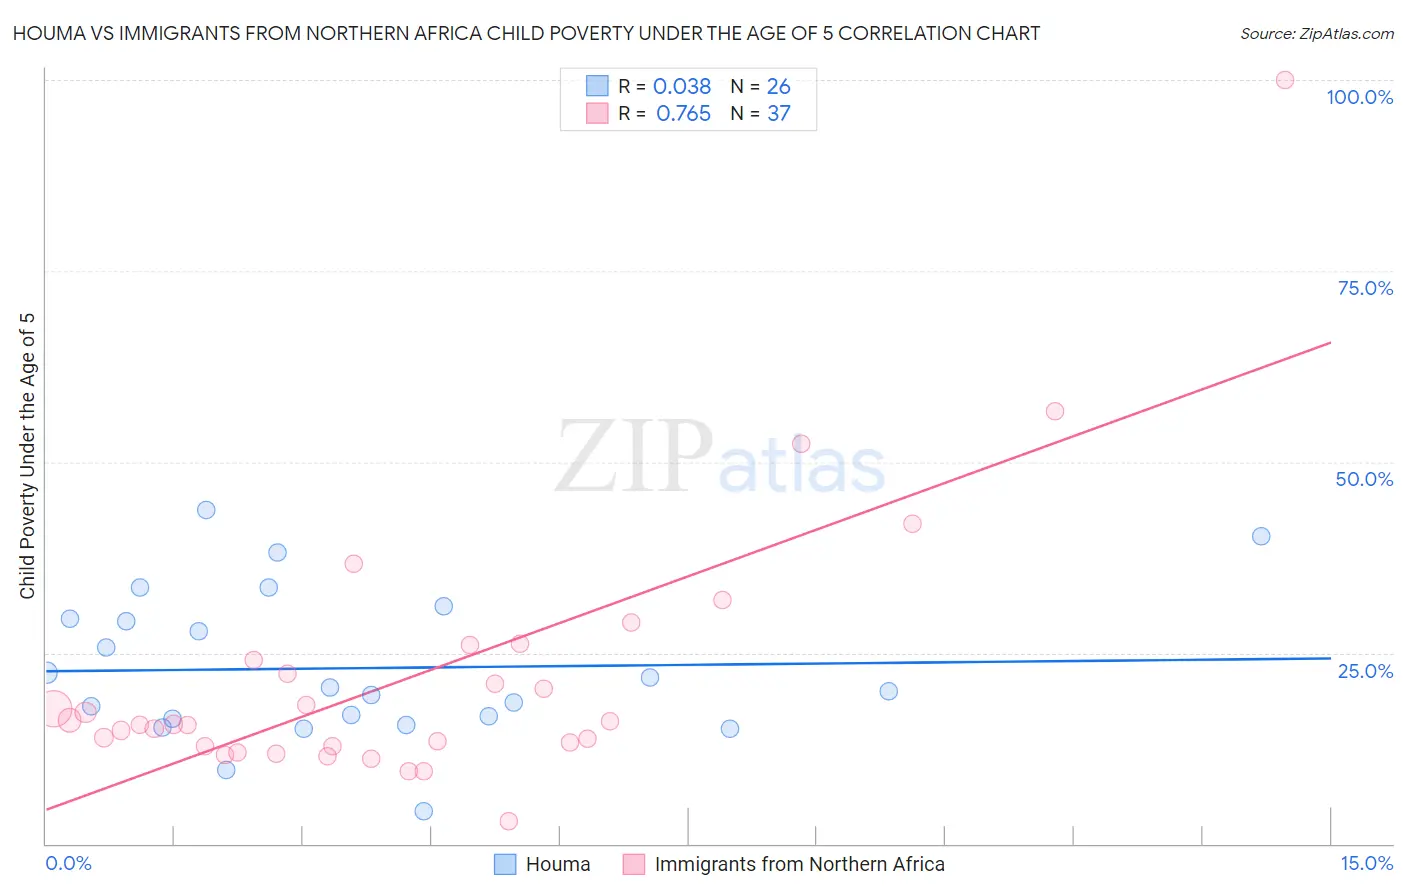 Houma vs Immigrants from Northern Africa Child Poverty Under the Age of 5